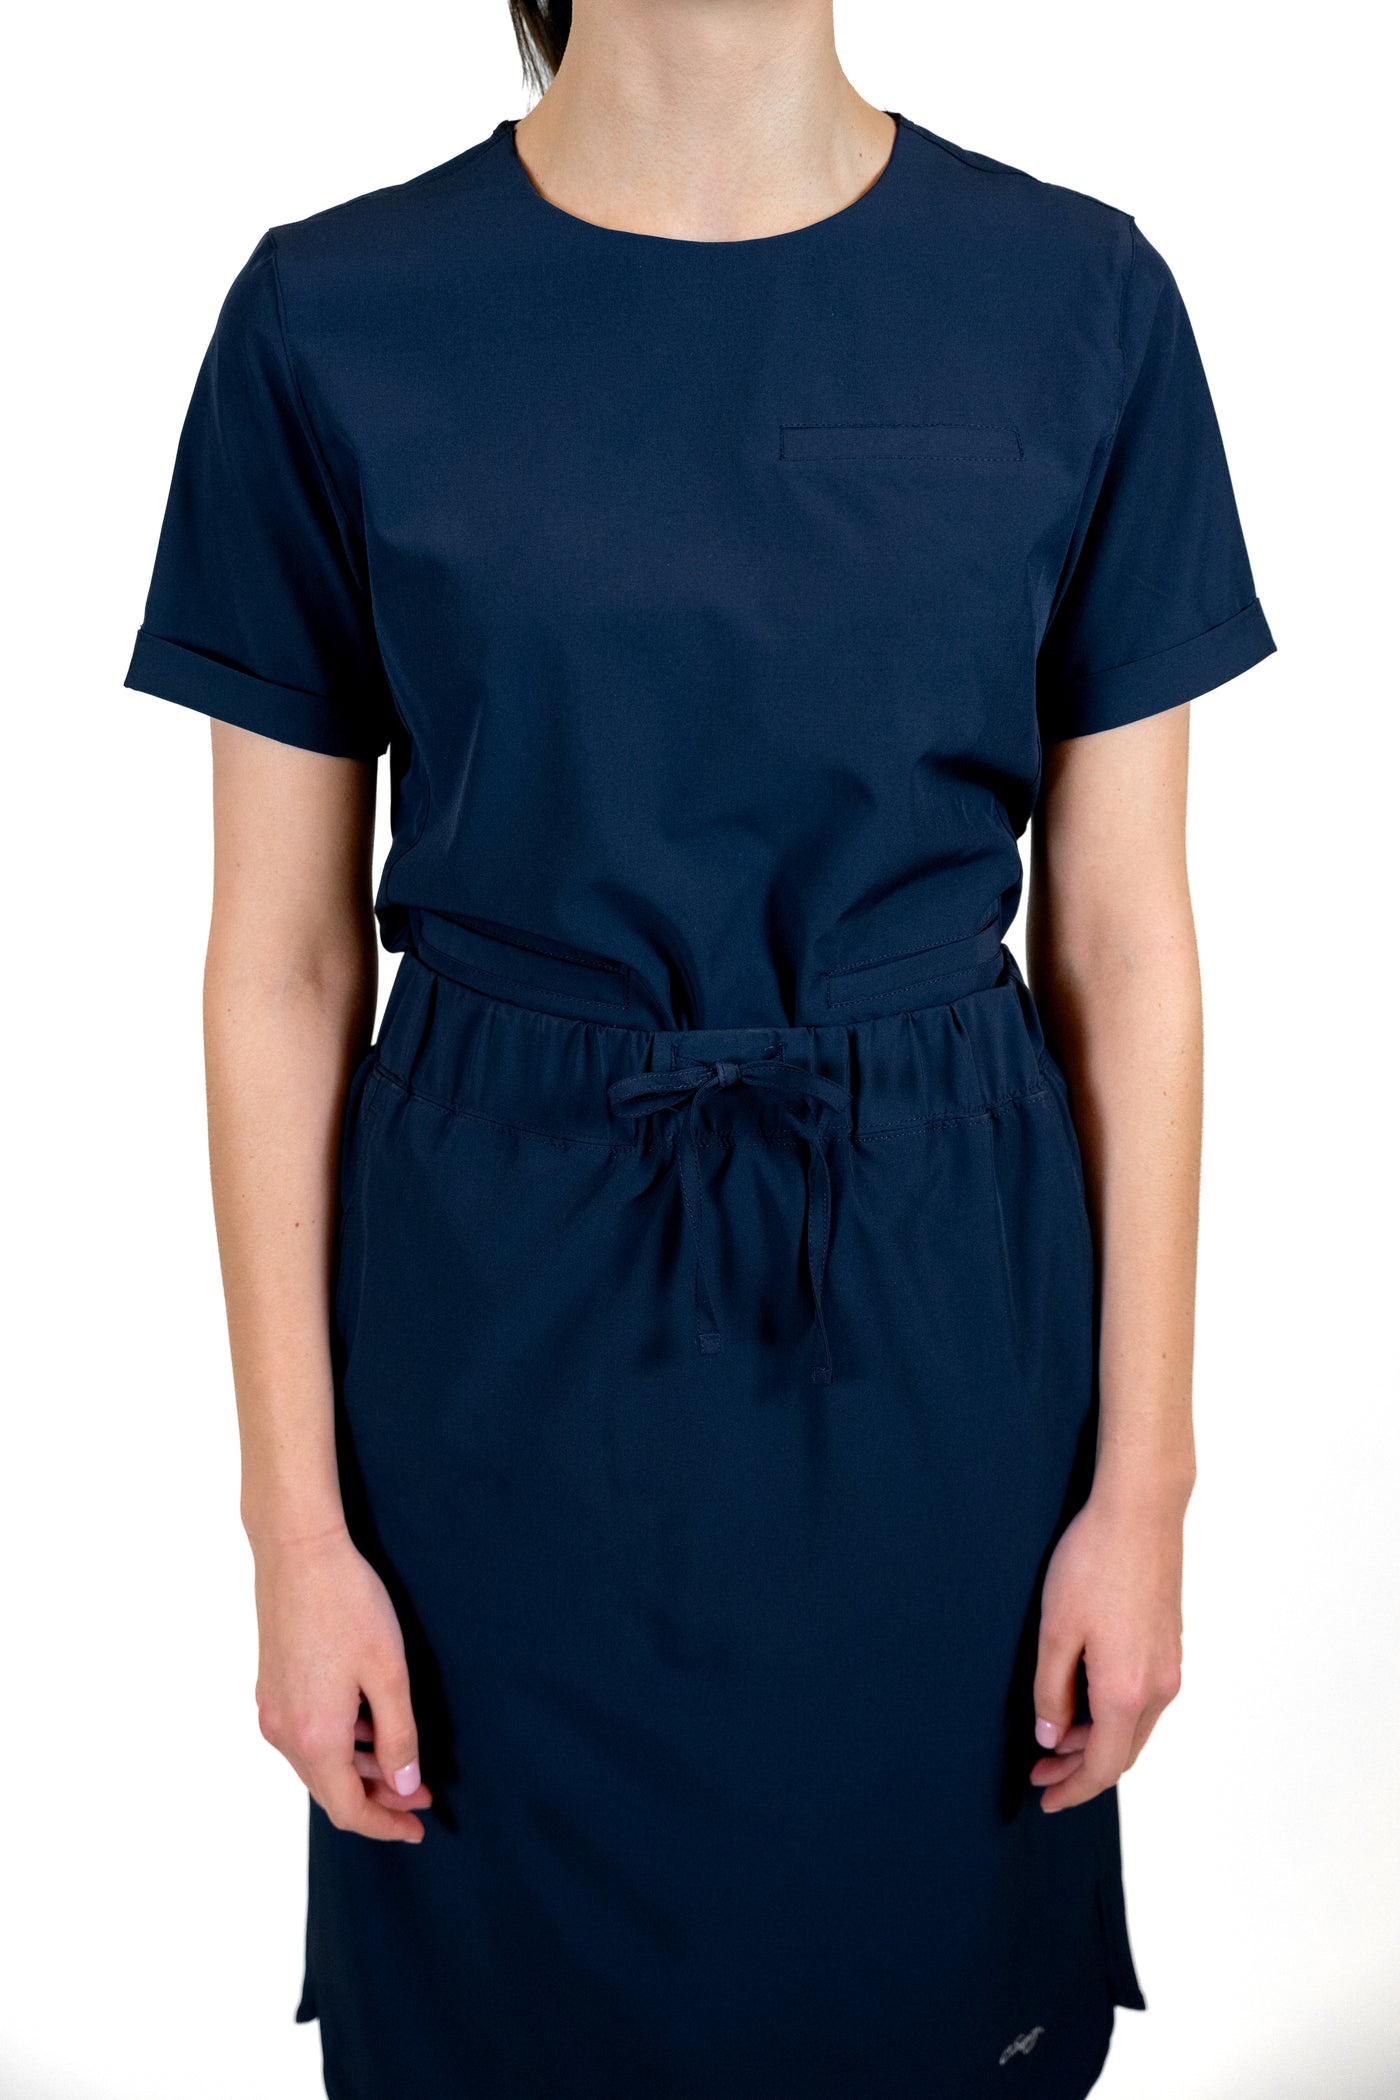 Scrubs skirt with a wide elastic band SPC3-G, navy blue